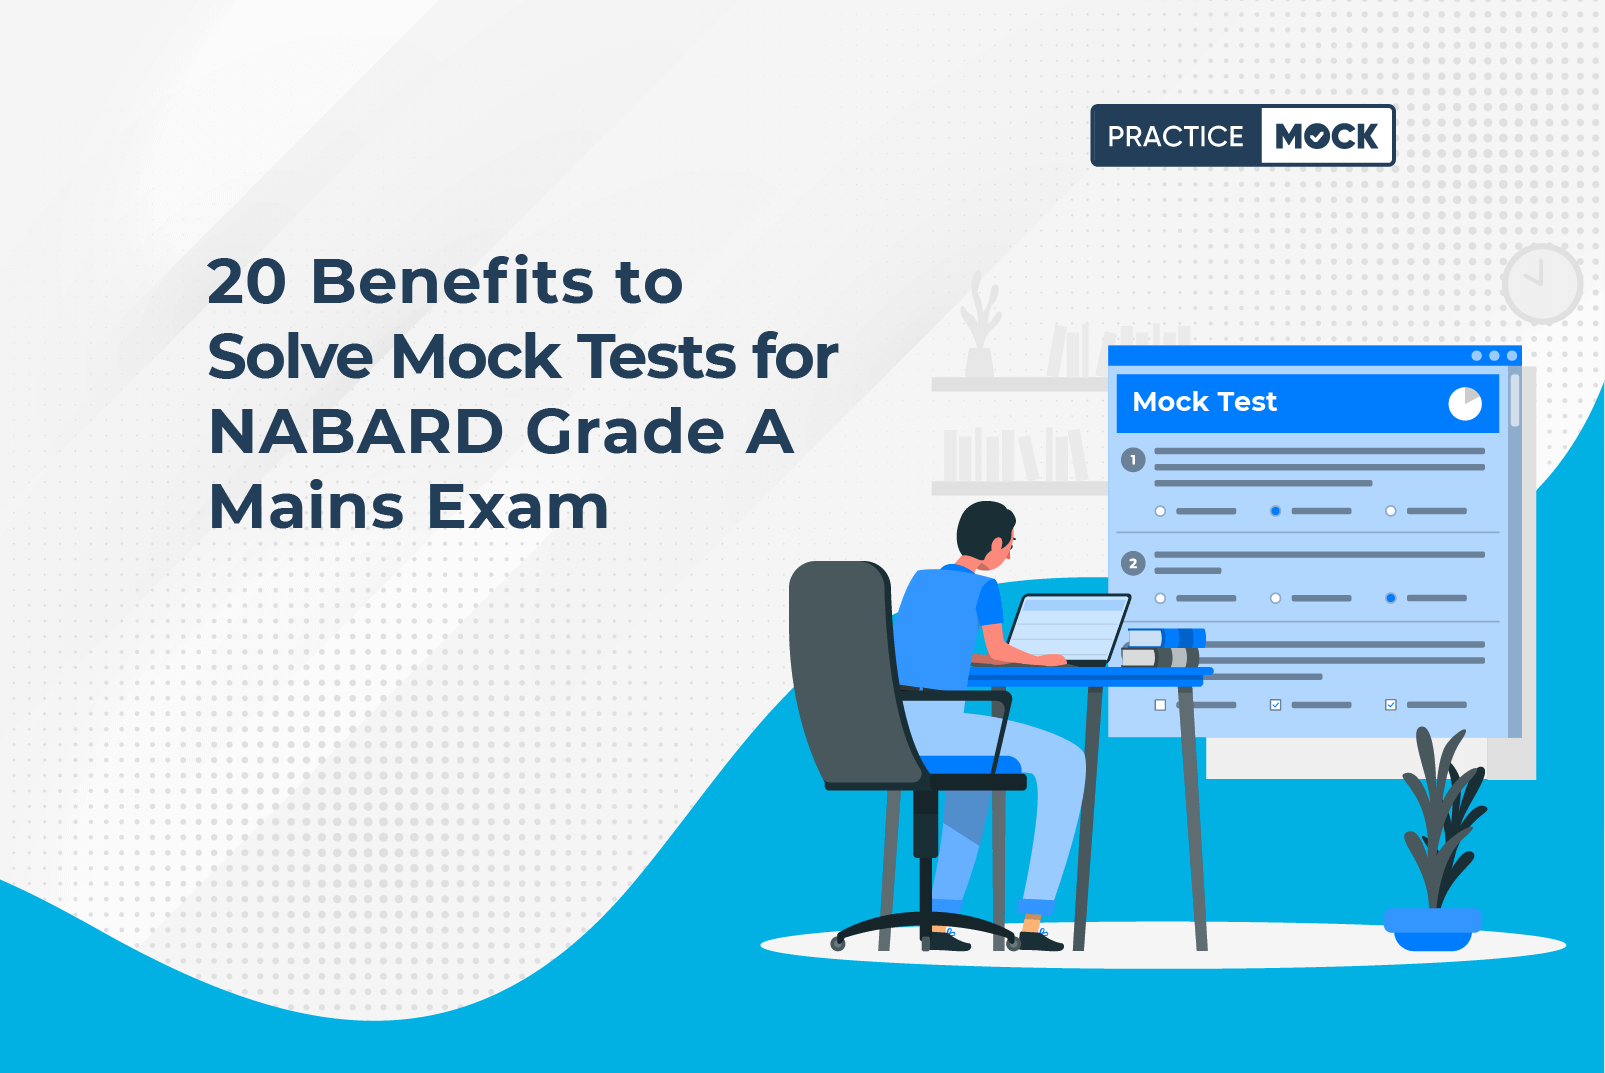 20 Benefits to Solve Mock Tests for NABARD Grade A Mains Exam